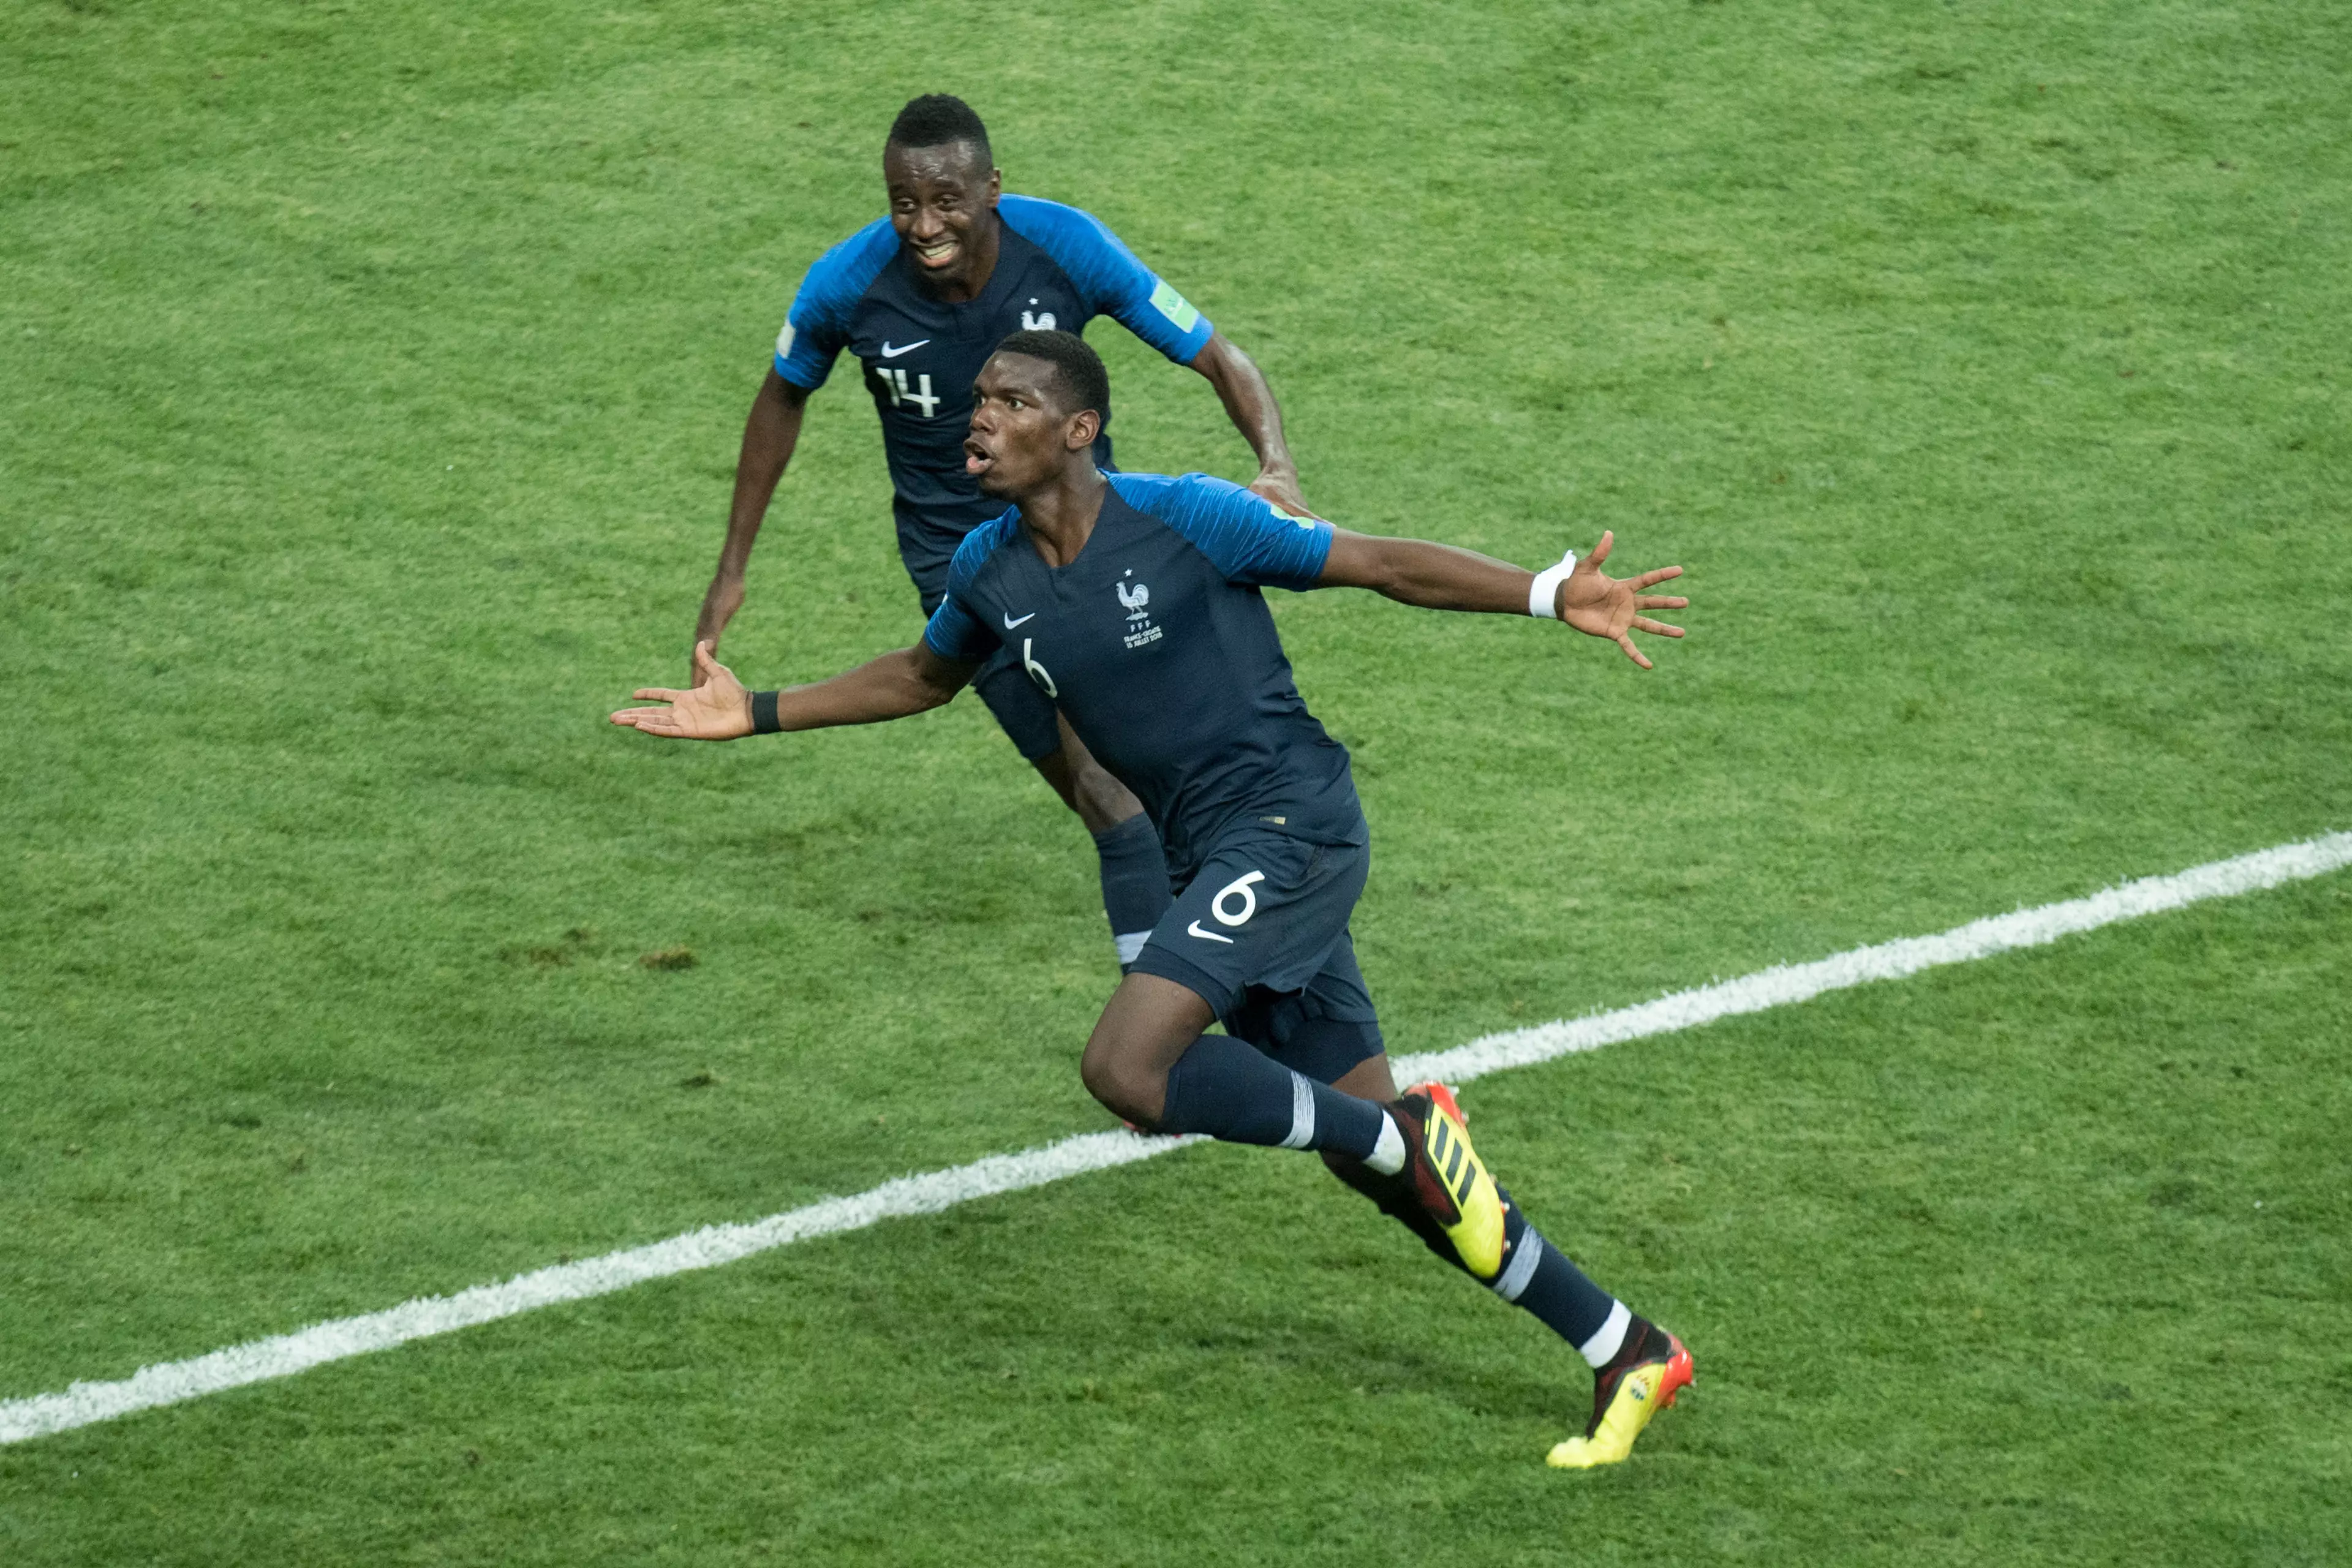 Pogba celebrating his goal in the final. Image: PA Images